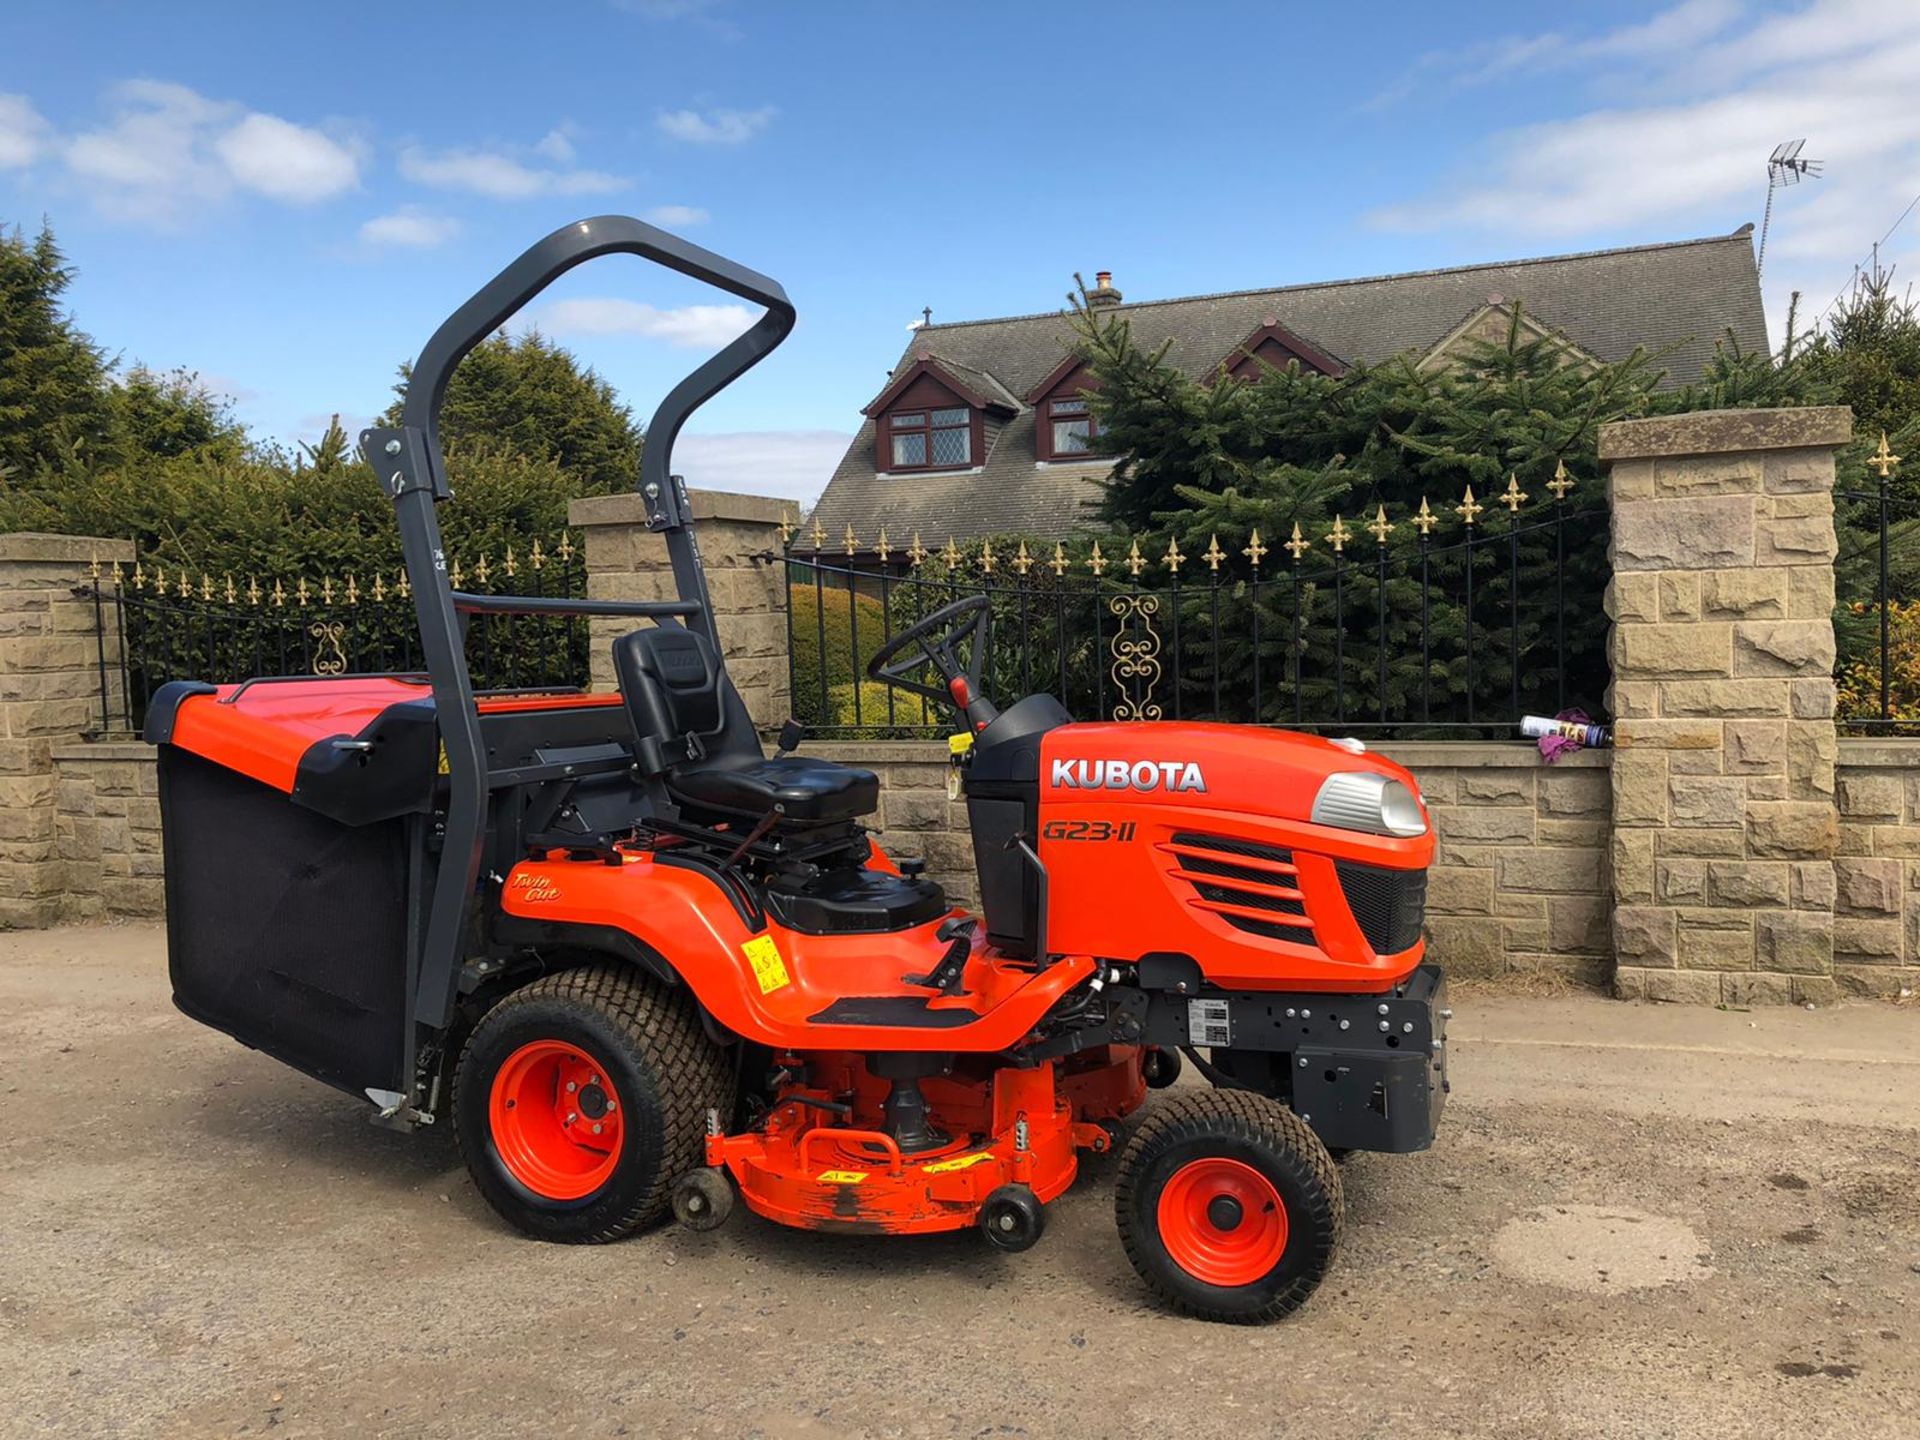 EX DEMO KUBOTA G23-11 RIDE ON LAWN MOWER - ONLY 30 HOURS FROM NEW, IN VERY GOOD CONDITION *PLUS VAT*